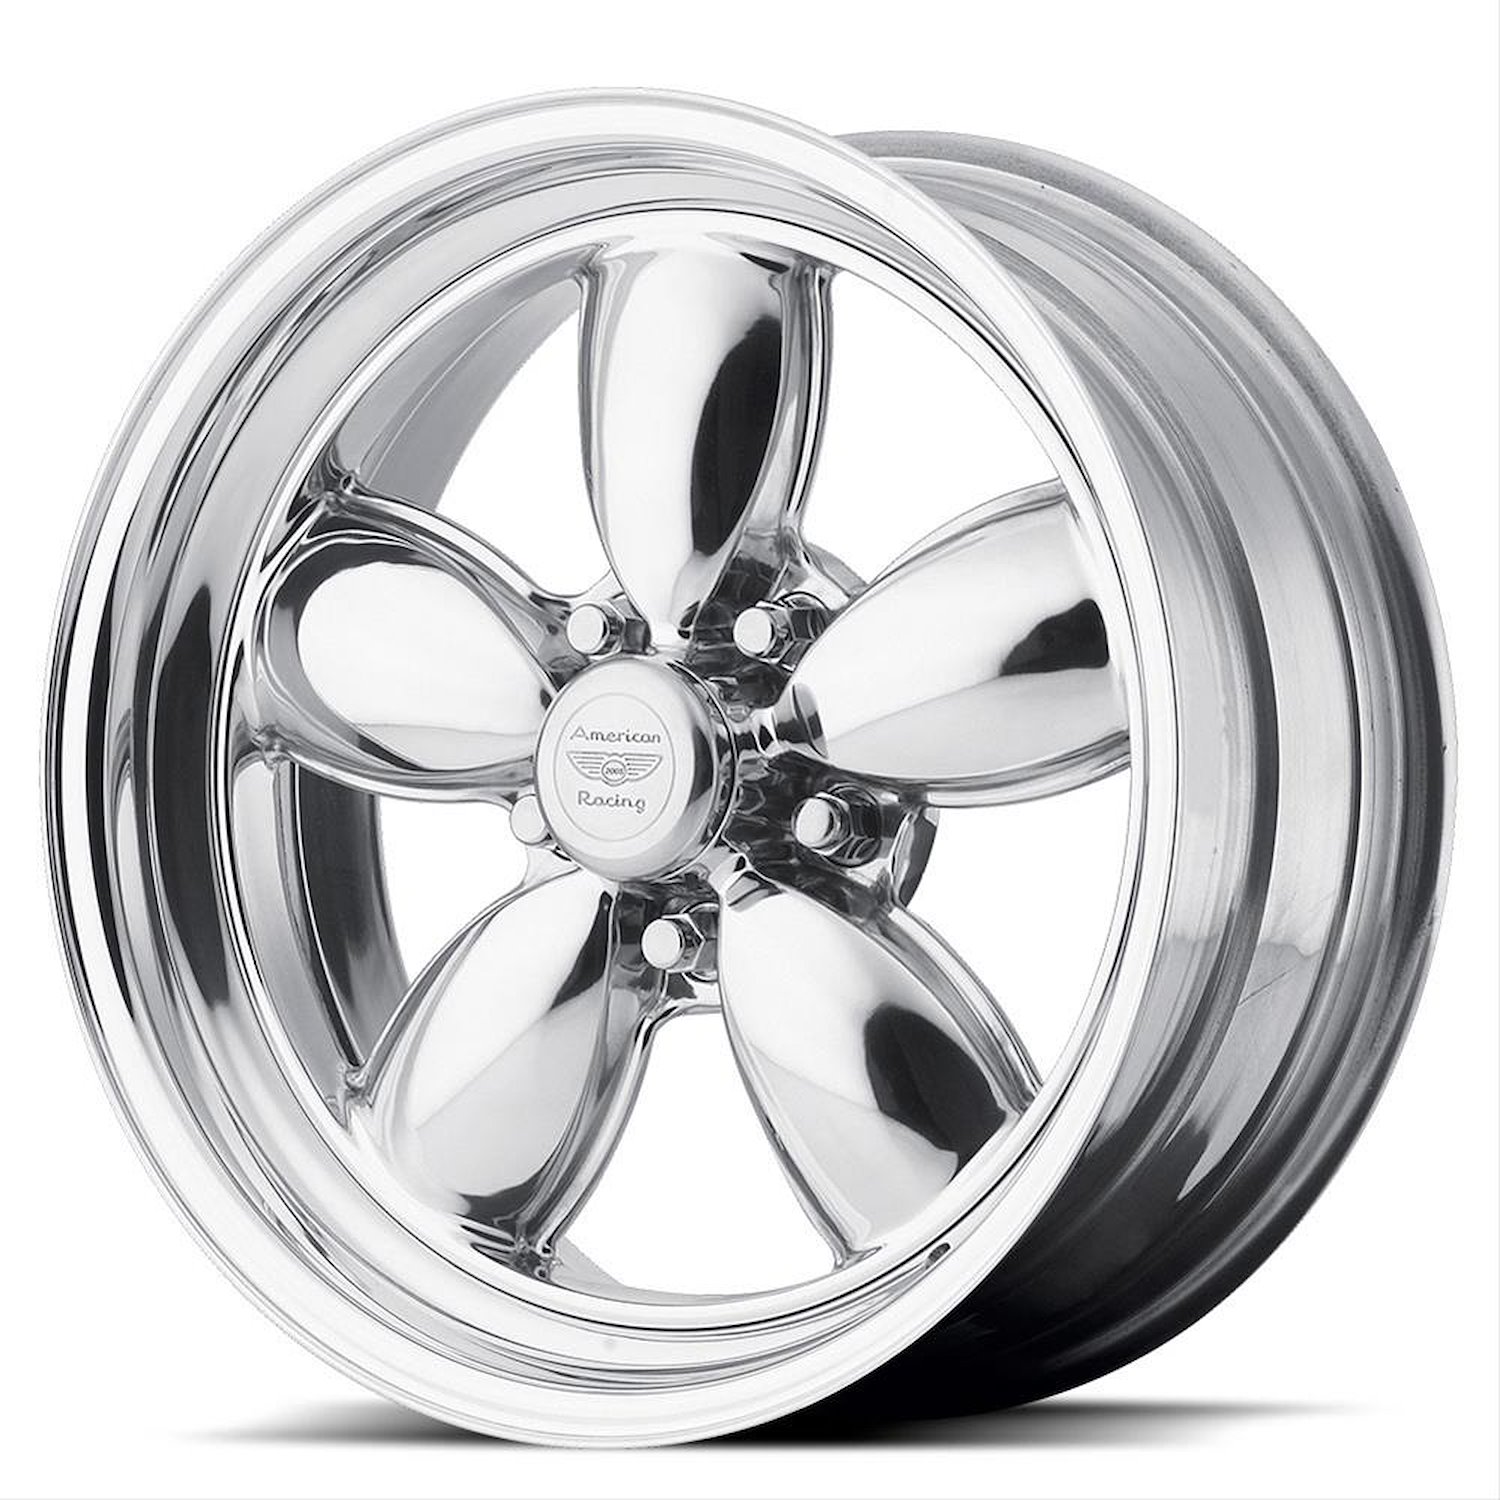 AMERICAN RACING CLASSIC 200S TWO-PIECE POLISHED 17 x 9.5 5x4.5 32 6.51